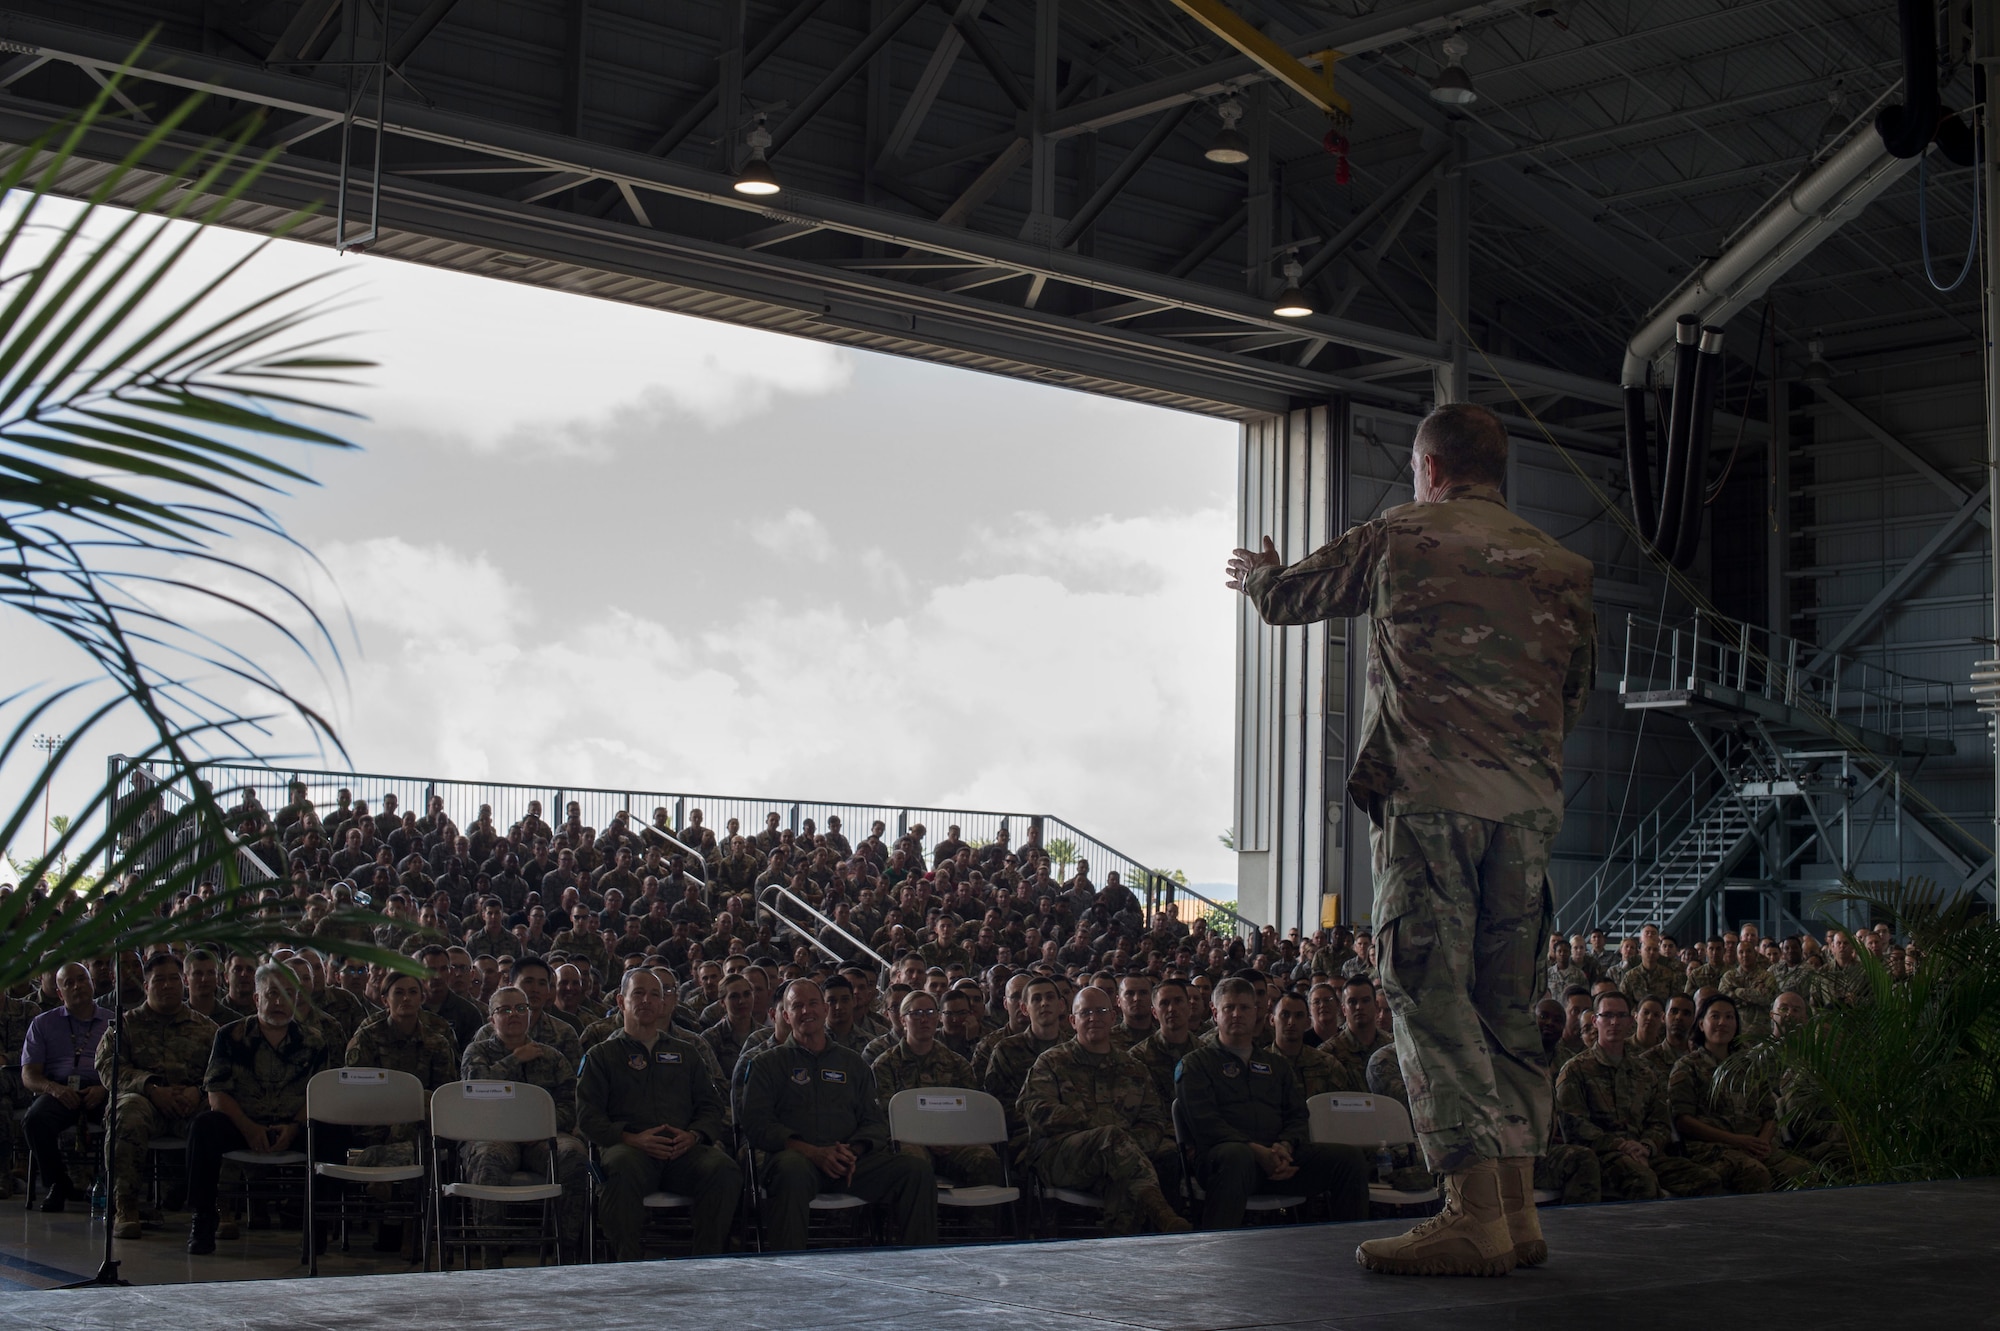 Air Force Chief of Staff Gen. David L. Goldfein speaks to Airmen during an all call at Joint Base Pearl Harbor-Hickam, Hawaii, Aug. 14, 2019. During the all call, Goldfein covered topics such as multi-domain operations, joint leaders and teams and the importance of squadrons in the Air Force. This was Goldfein’s first stop as he visits various units in the Indo-Pacific.  (U.S. Air Force photo by Tech. Sgt. Heather Redman)